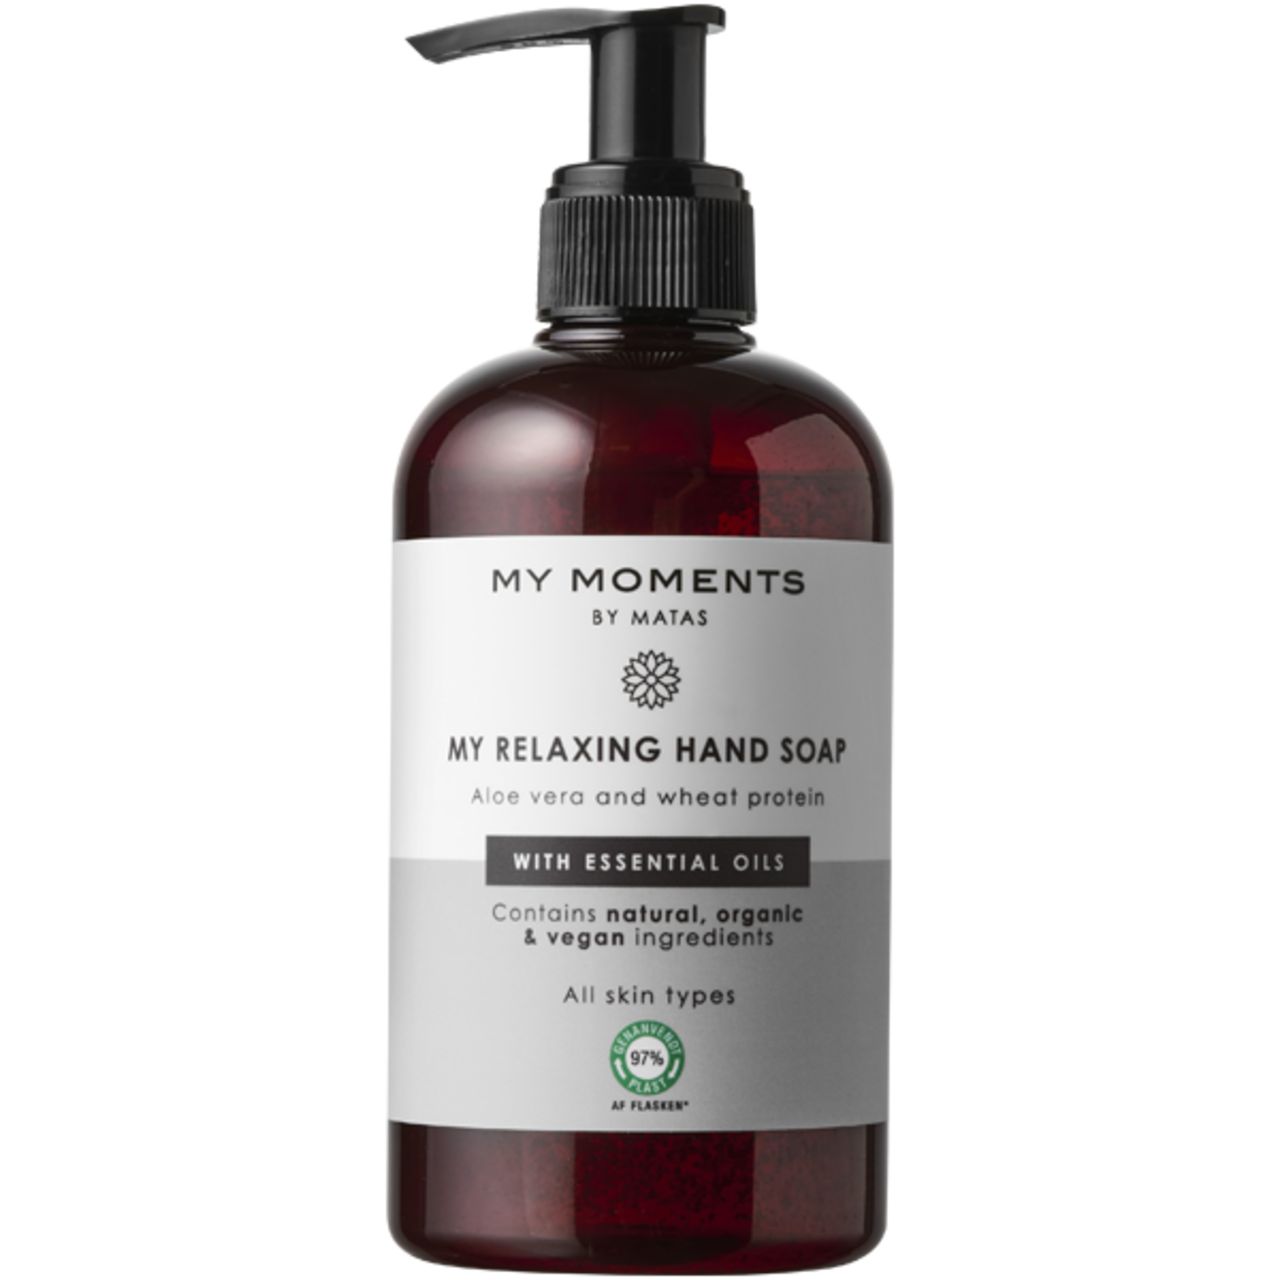 Matas Beauty, My Moments My Relaxing Hand Soap